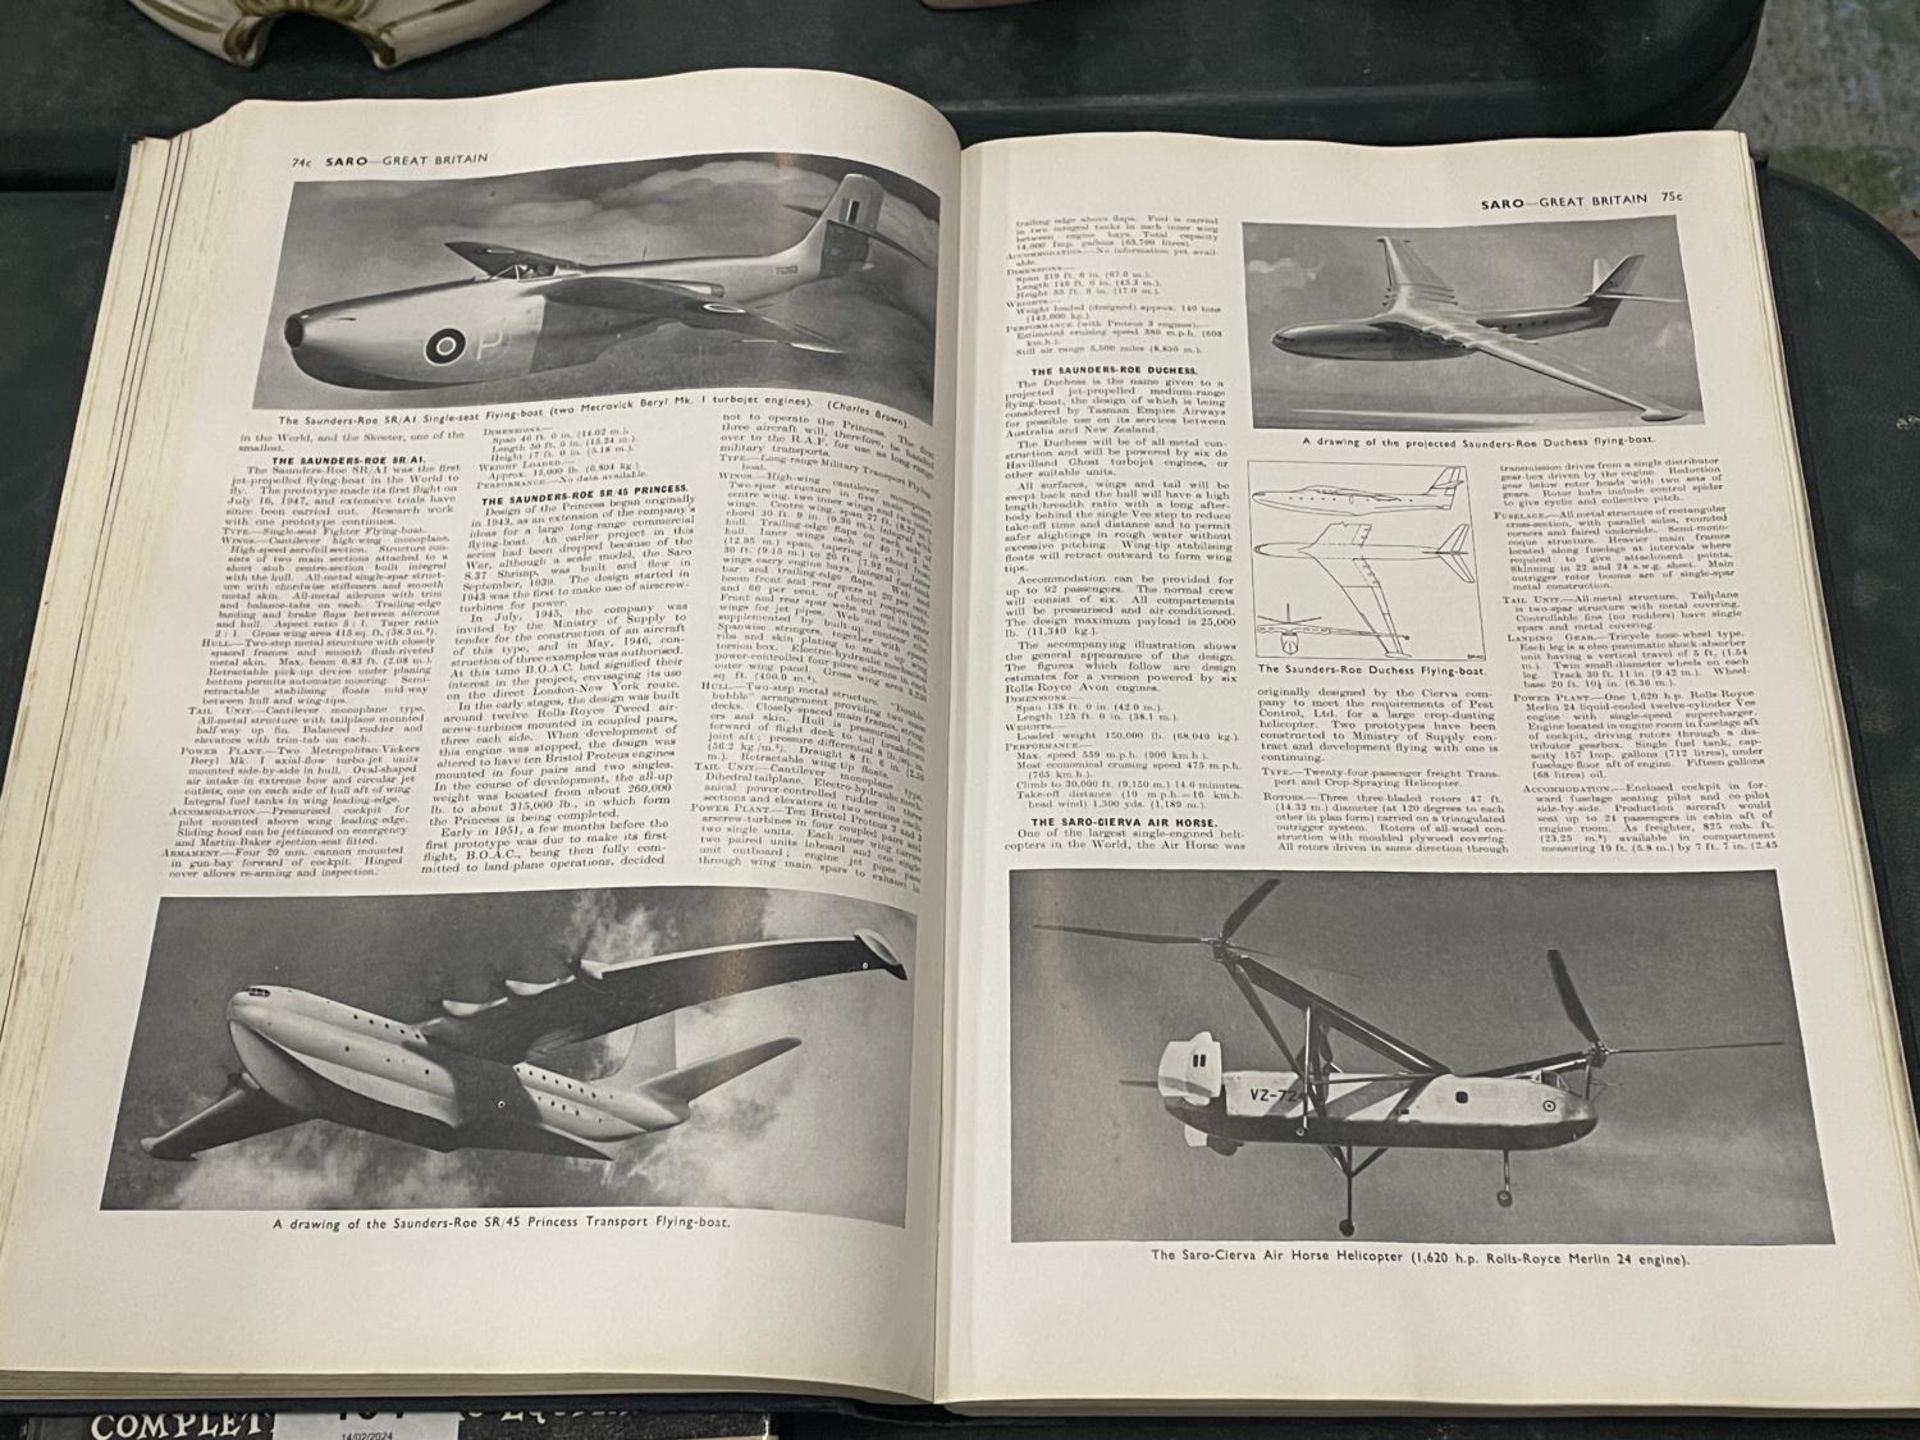 A VINTAGE 'JANE'S ALL THE WORLD'S AIRCRAFT' 1951/52 HARDBACK BOOK, PUBLISHED BY SAMPSON LOWE - Bild 5 aus 6